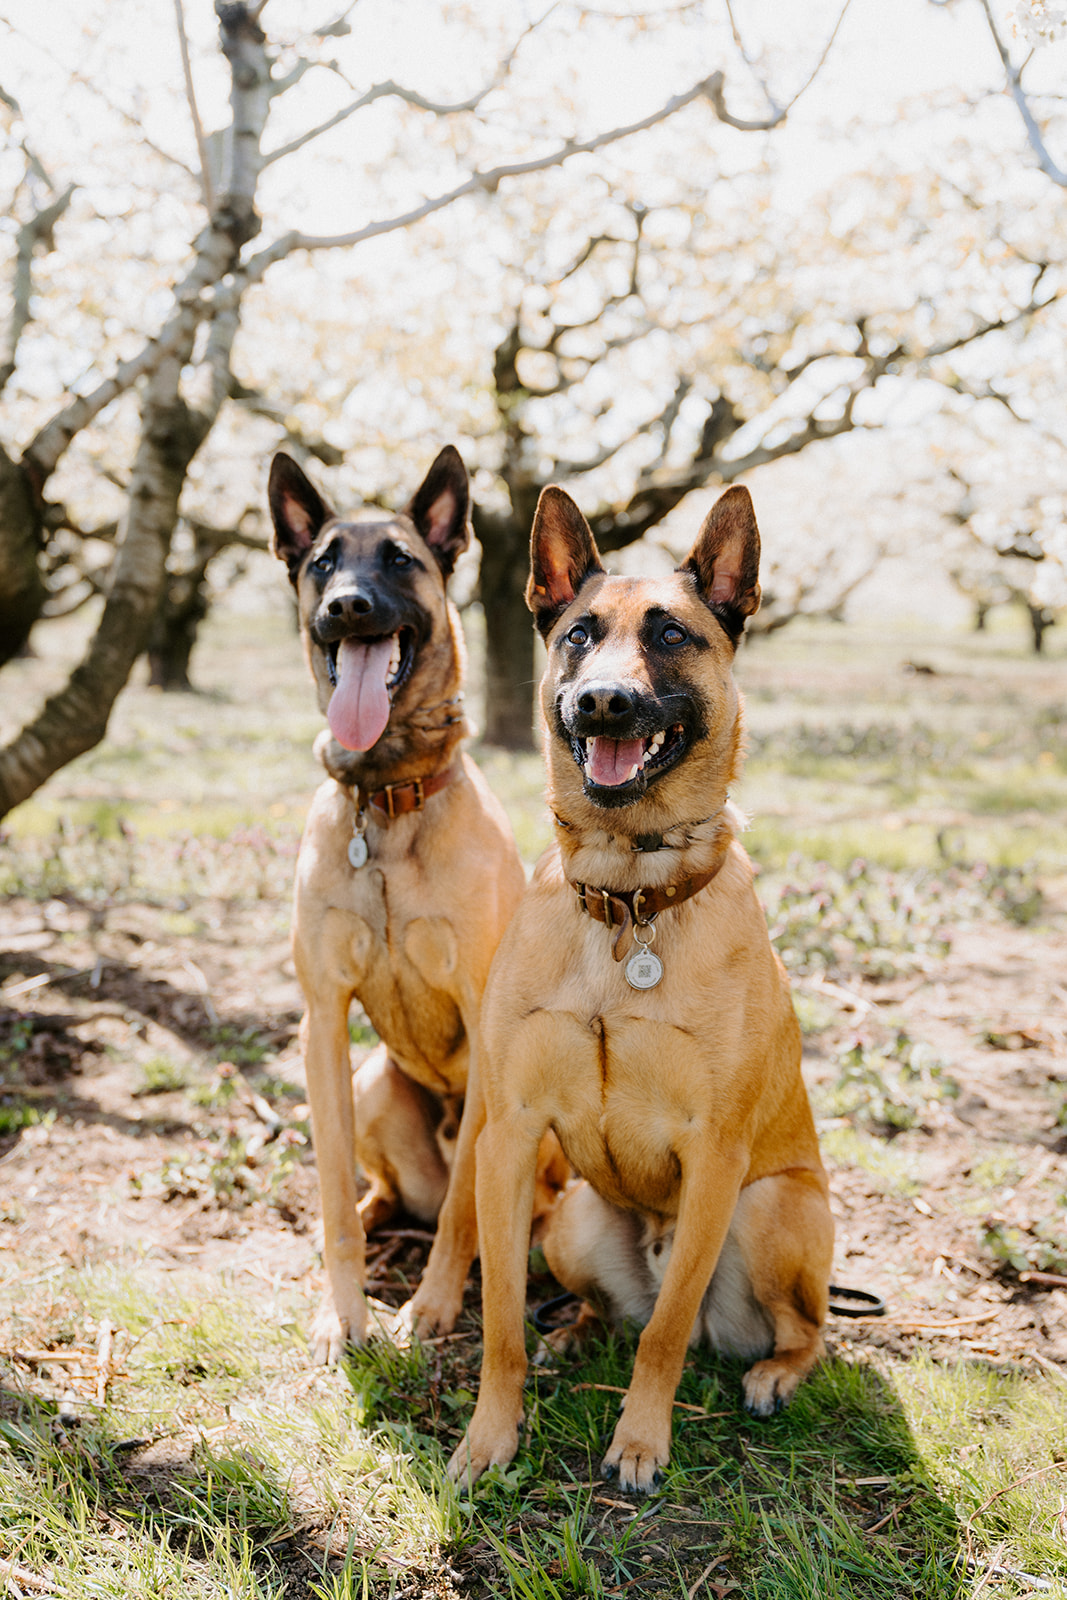 Two dogs sitting side by side underneath a cherry blossom tree.